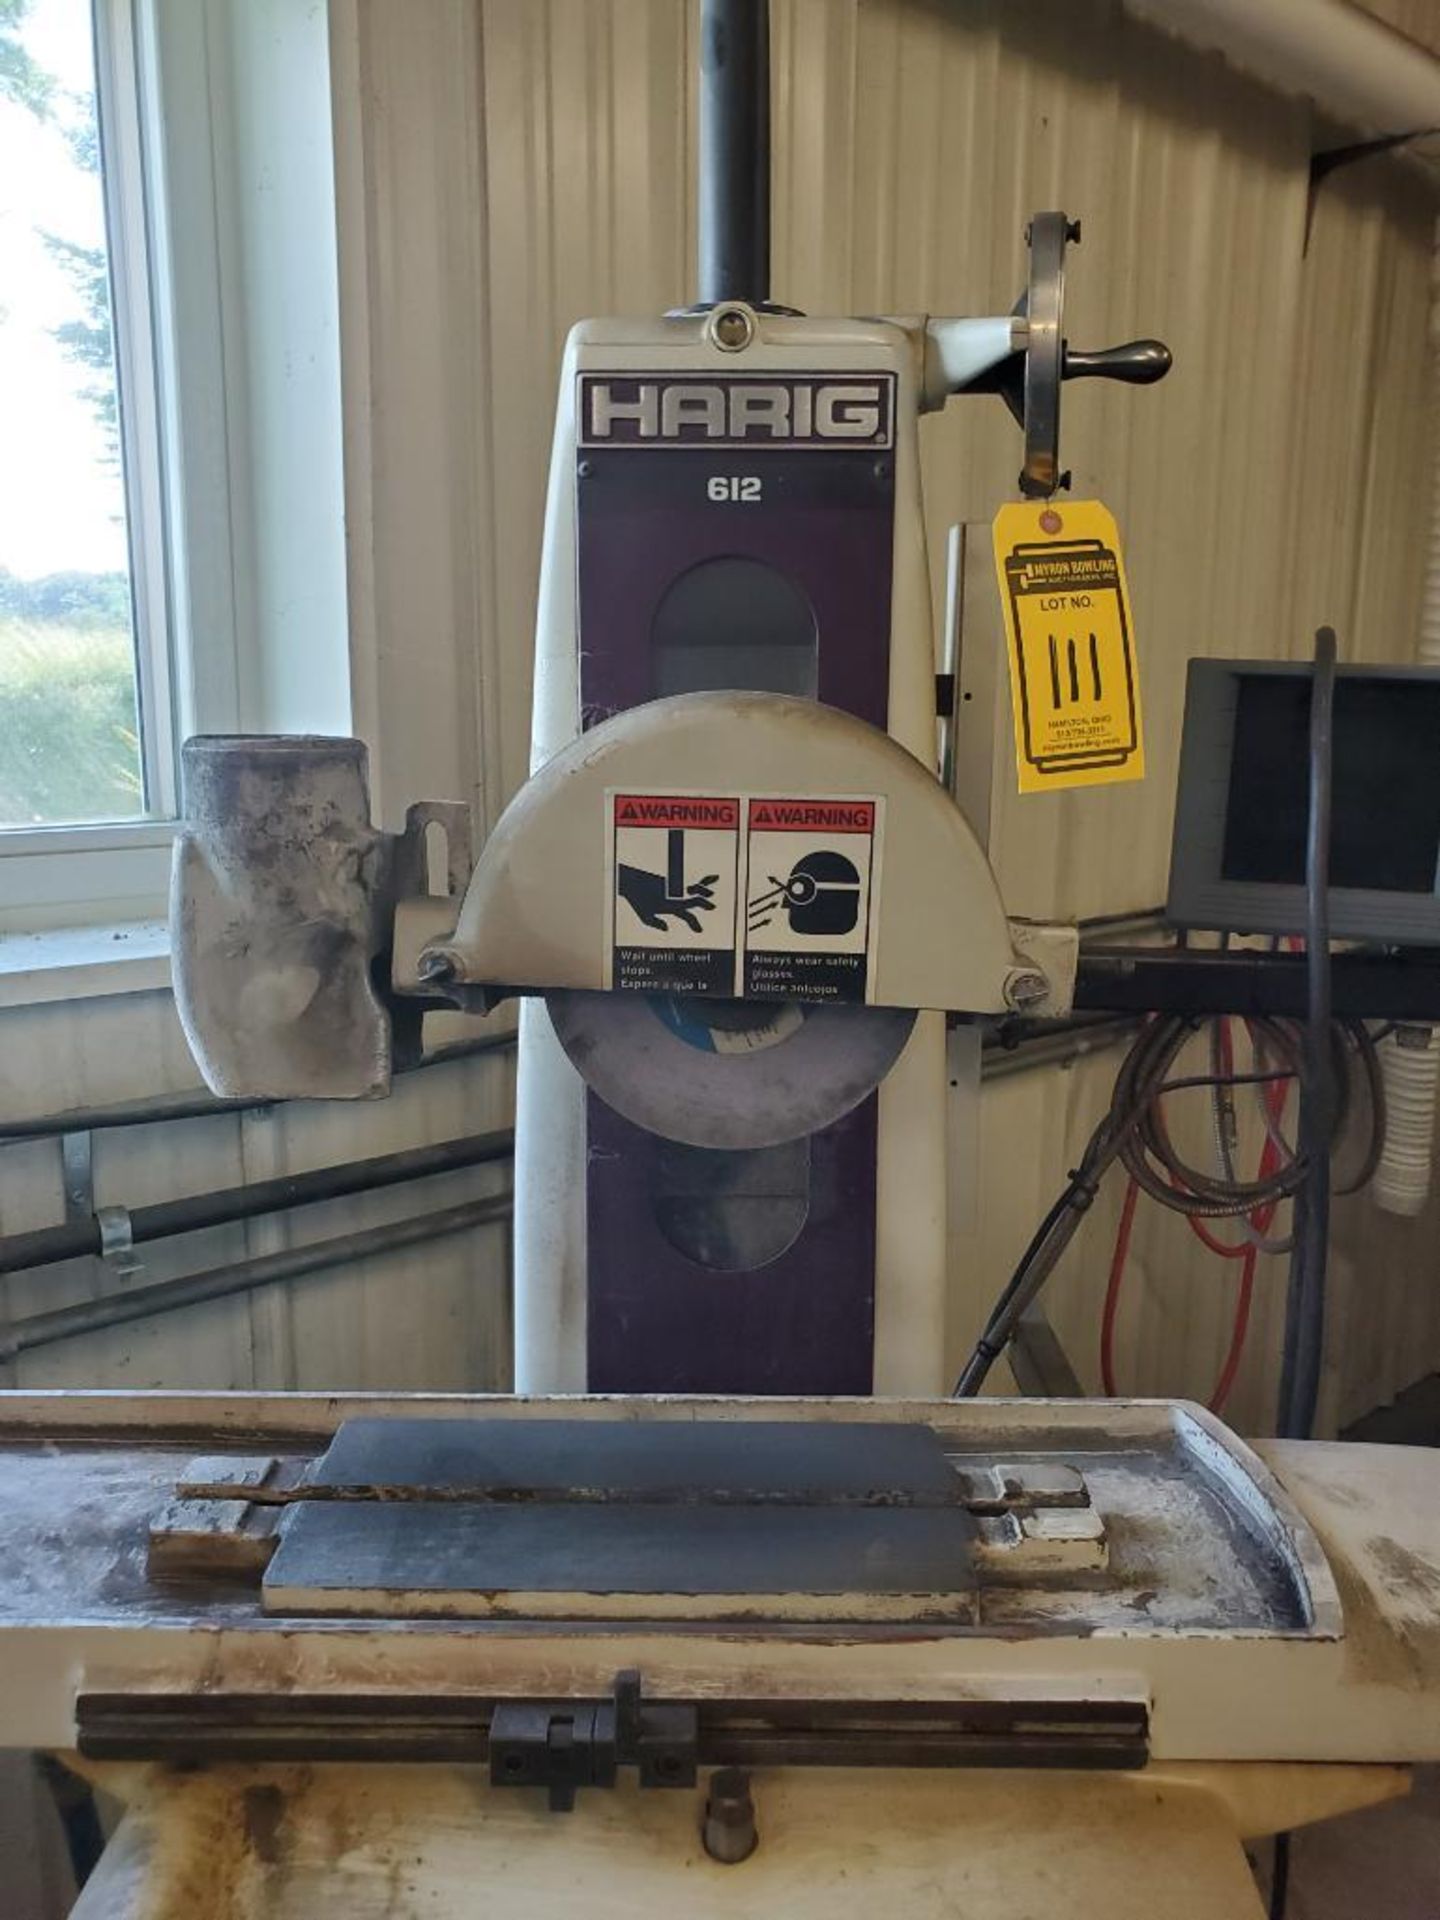 HARIG 612 HAND FEED SURFACE GRINDER WITH ACU-RITE DRO CONTROLS AND TOOL STEEL HARDENED WAY - Image 3 of 4